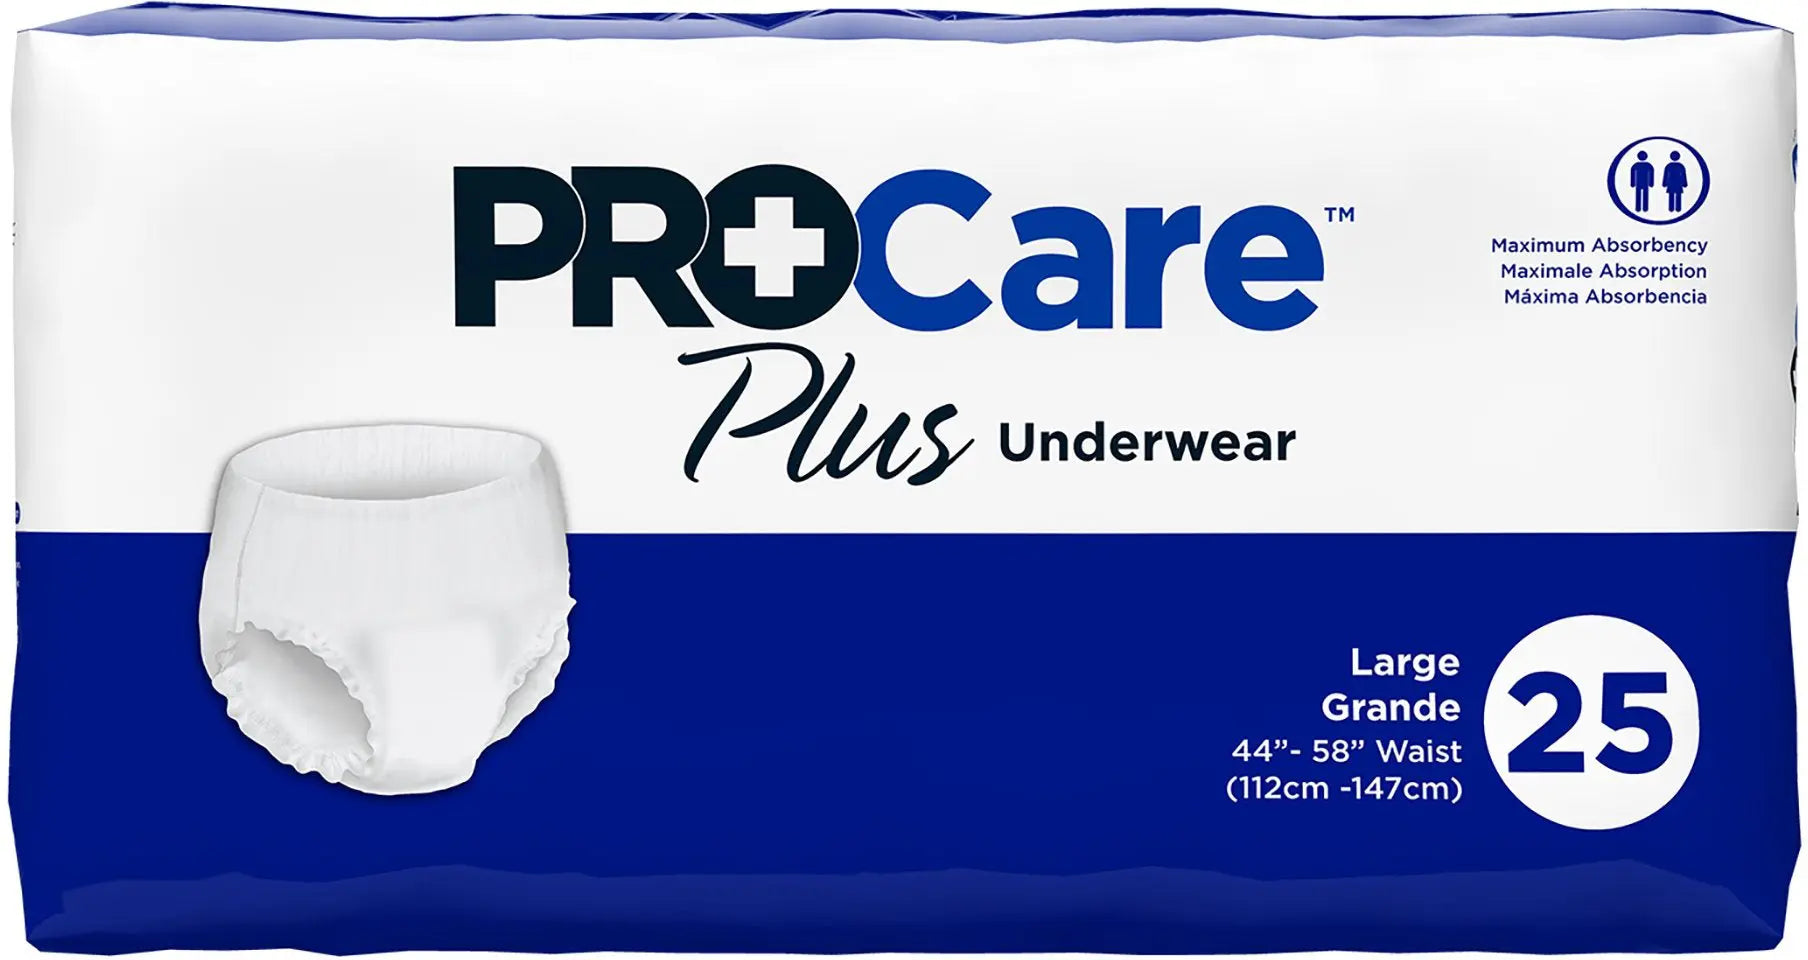 Procare Protective underwear pullup moderate to maxium absorbency